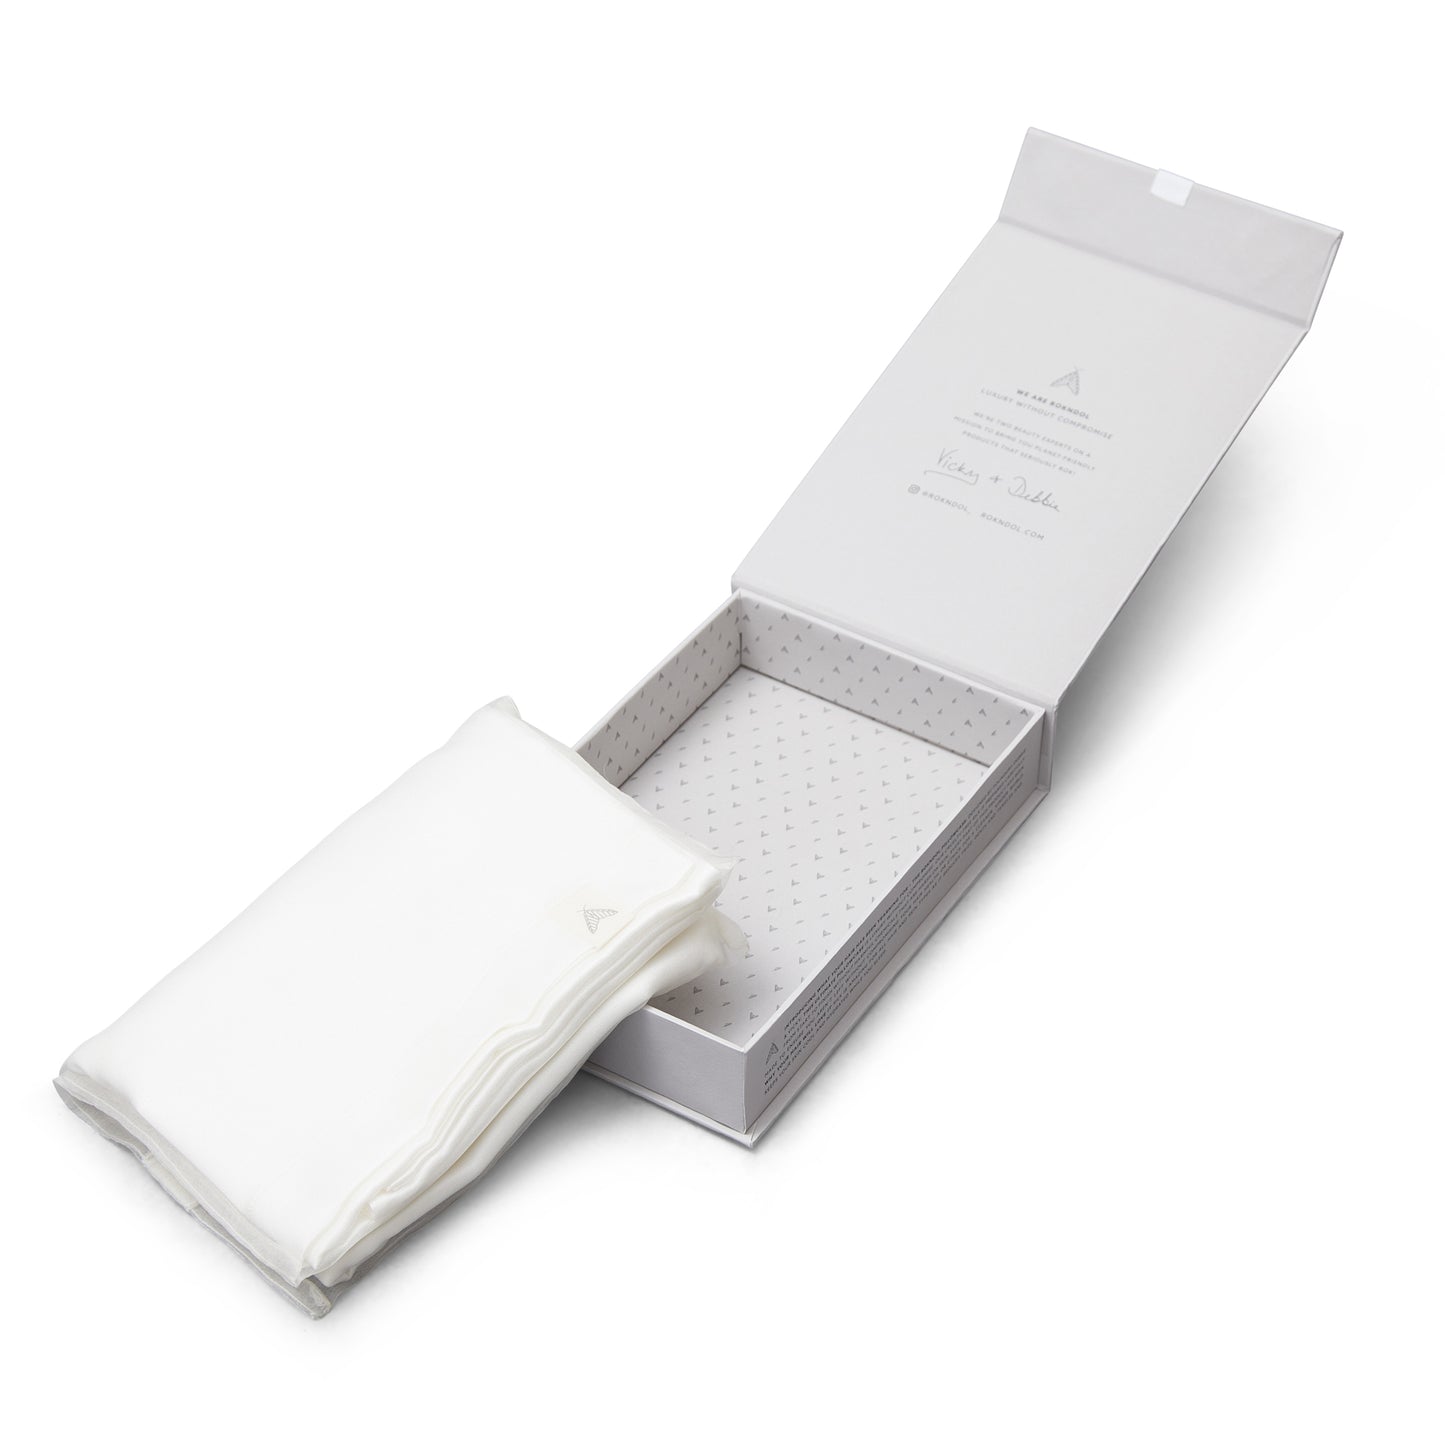 Ethical silk pillowcase in white peace silk, with FSC certified gift box